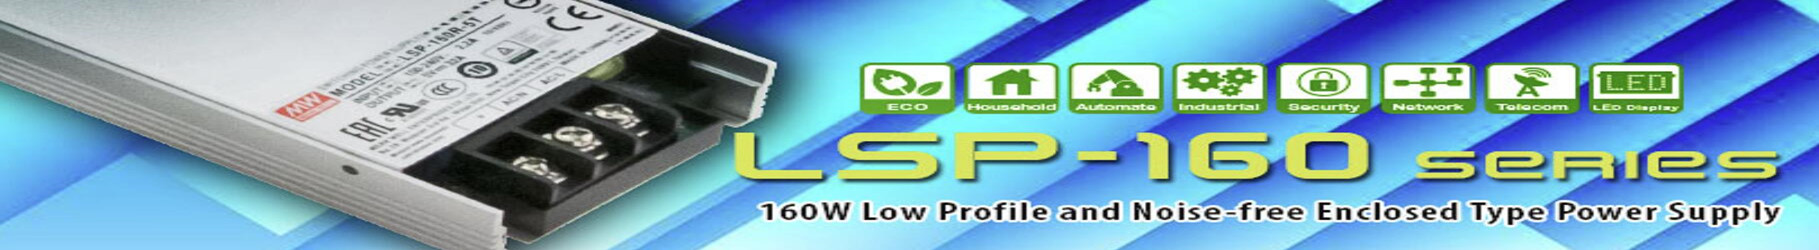 Product specification upgrade notice: LSP-160 series can be upgraded to 200W